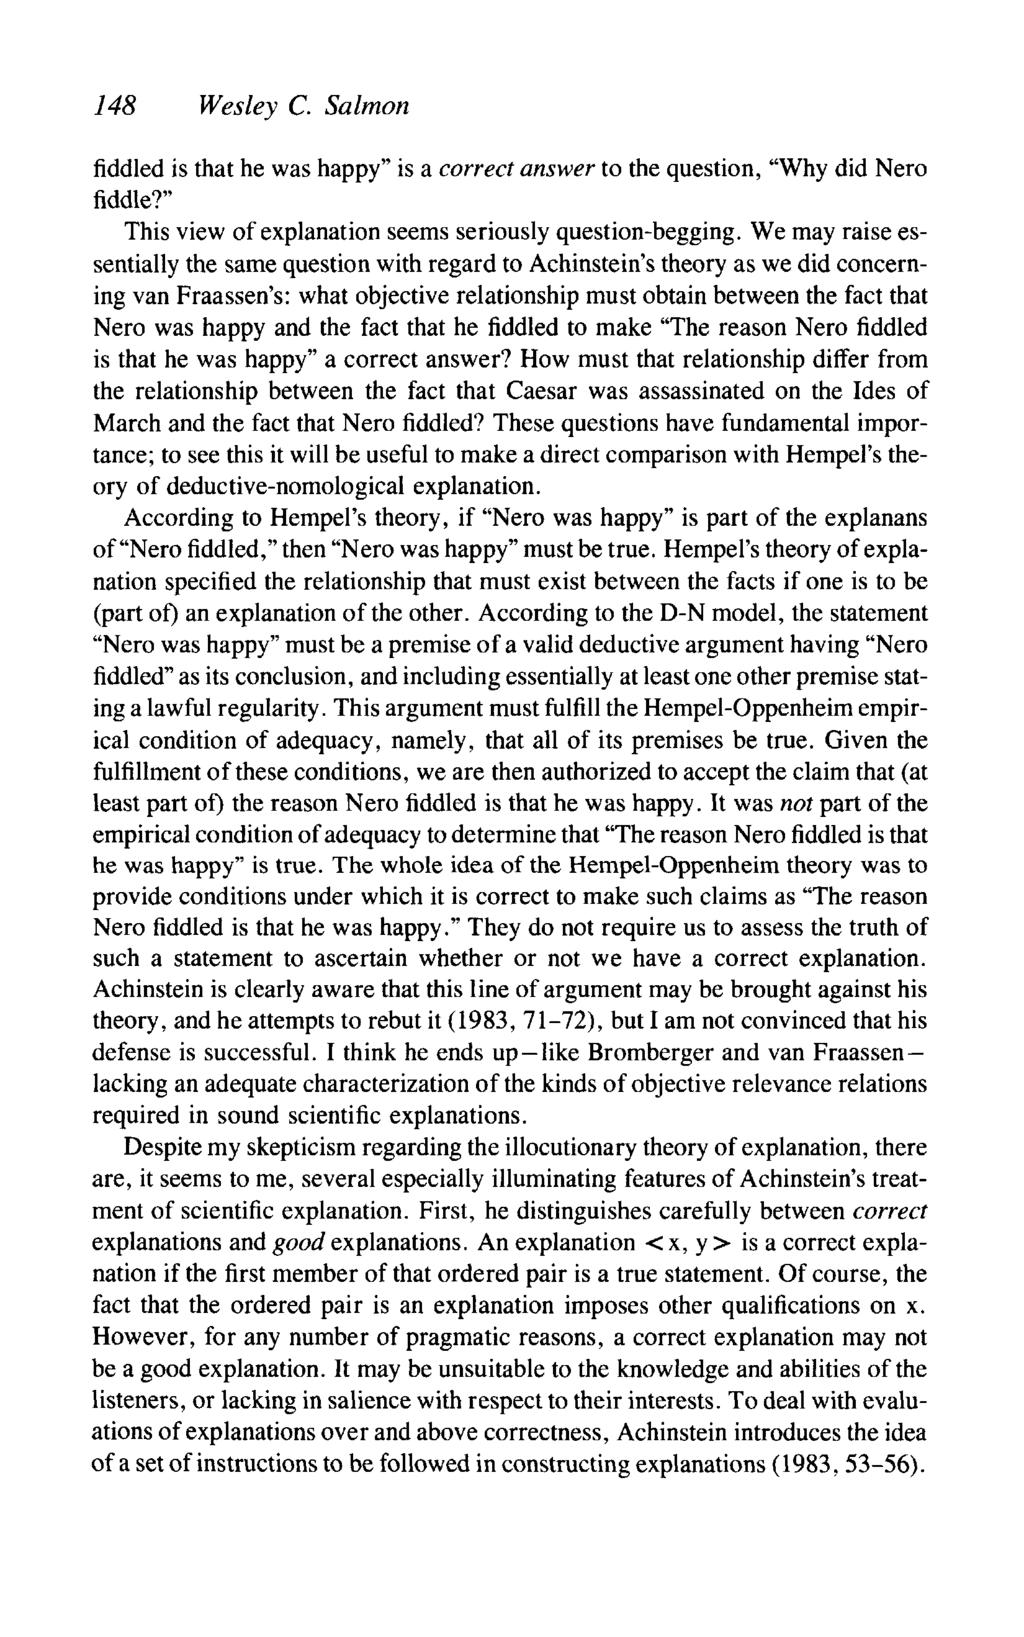 148 Wesley C. Salmon fiddled is that he was happy" is a correct answer to the question, "Why did Nero fiddle?" This view of explanation seems seriously question-begging.